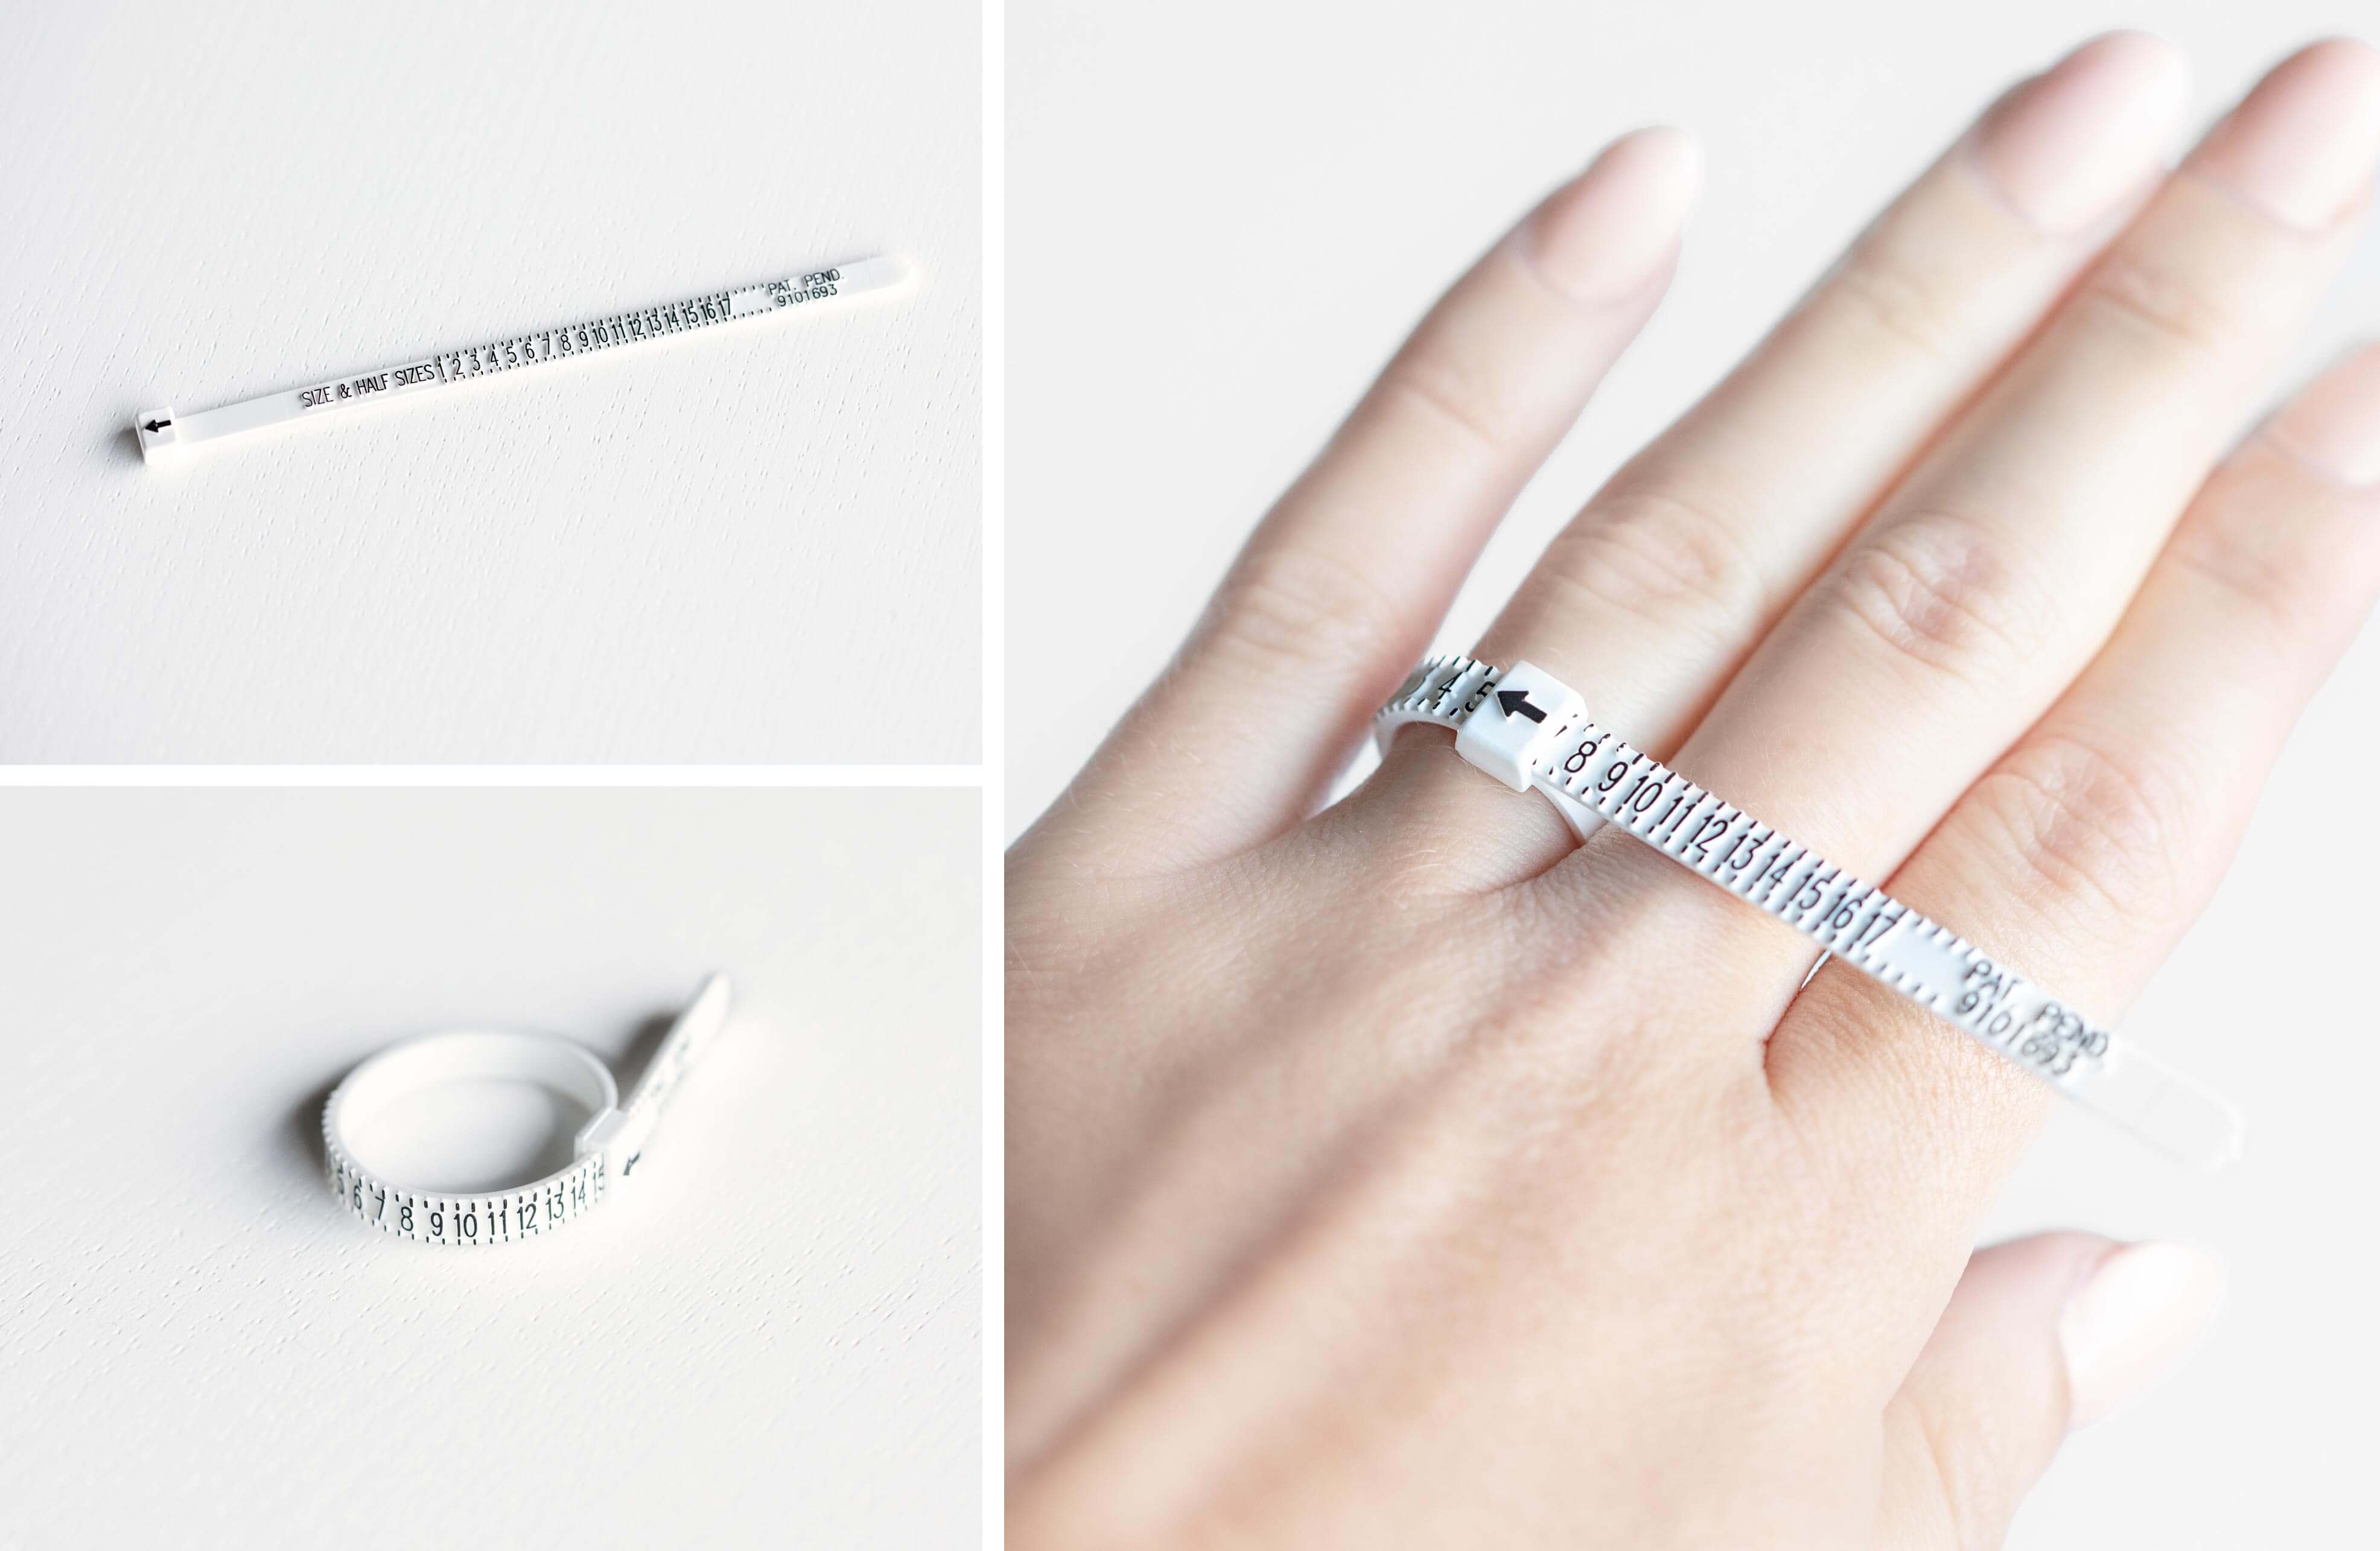 A ring sizing measuring tape wrapped around a finger to determine size.